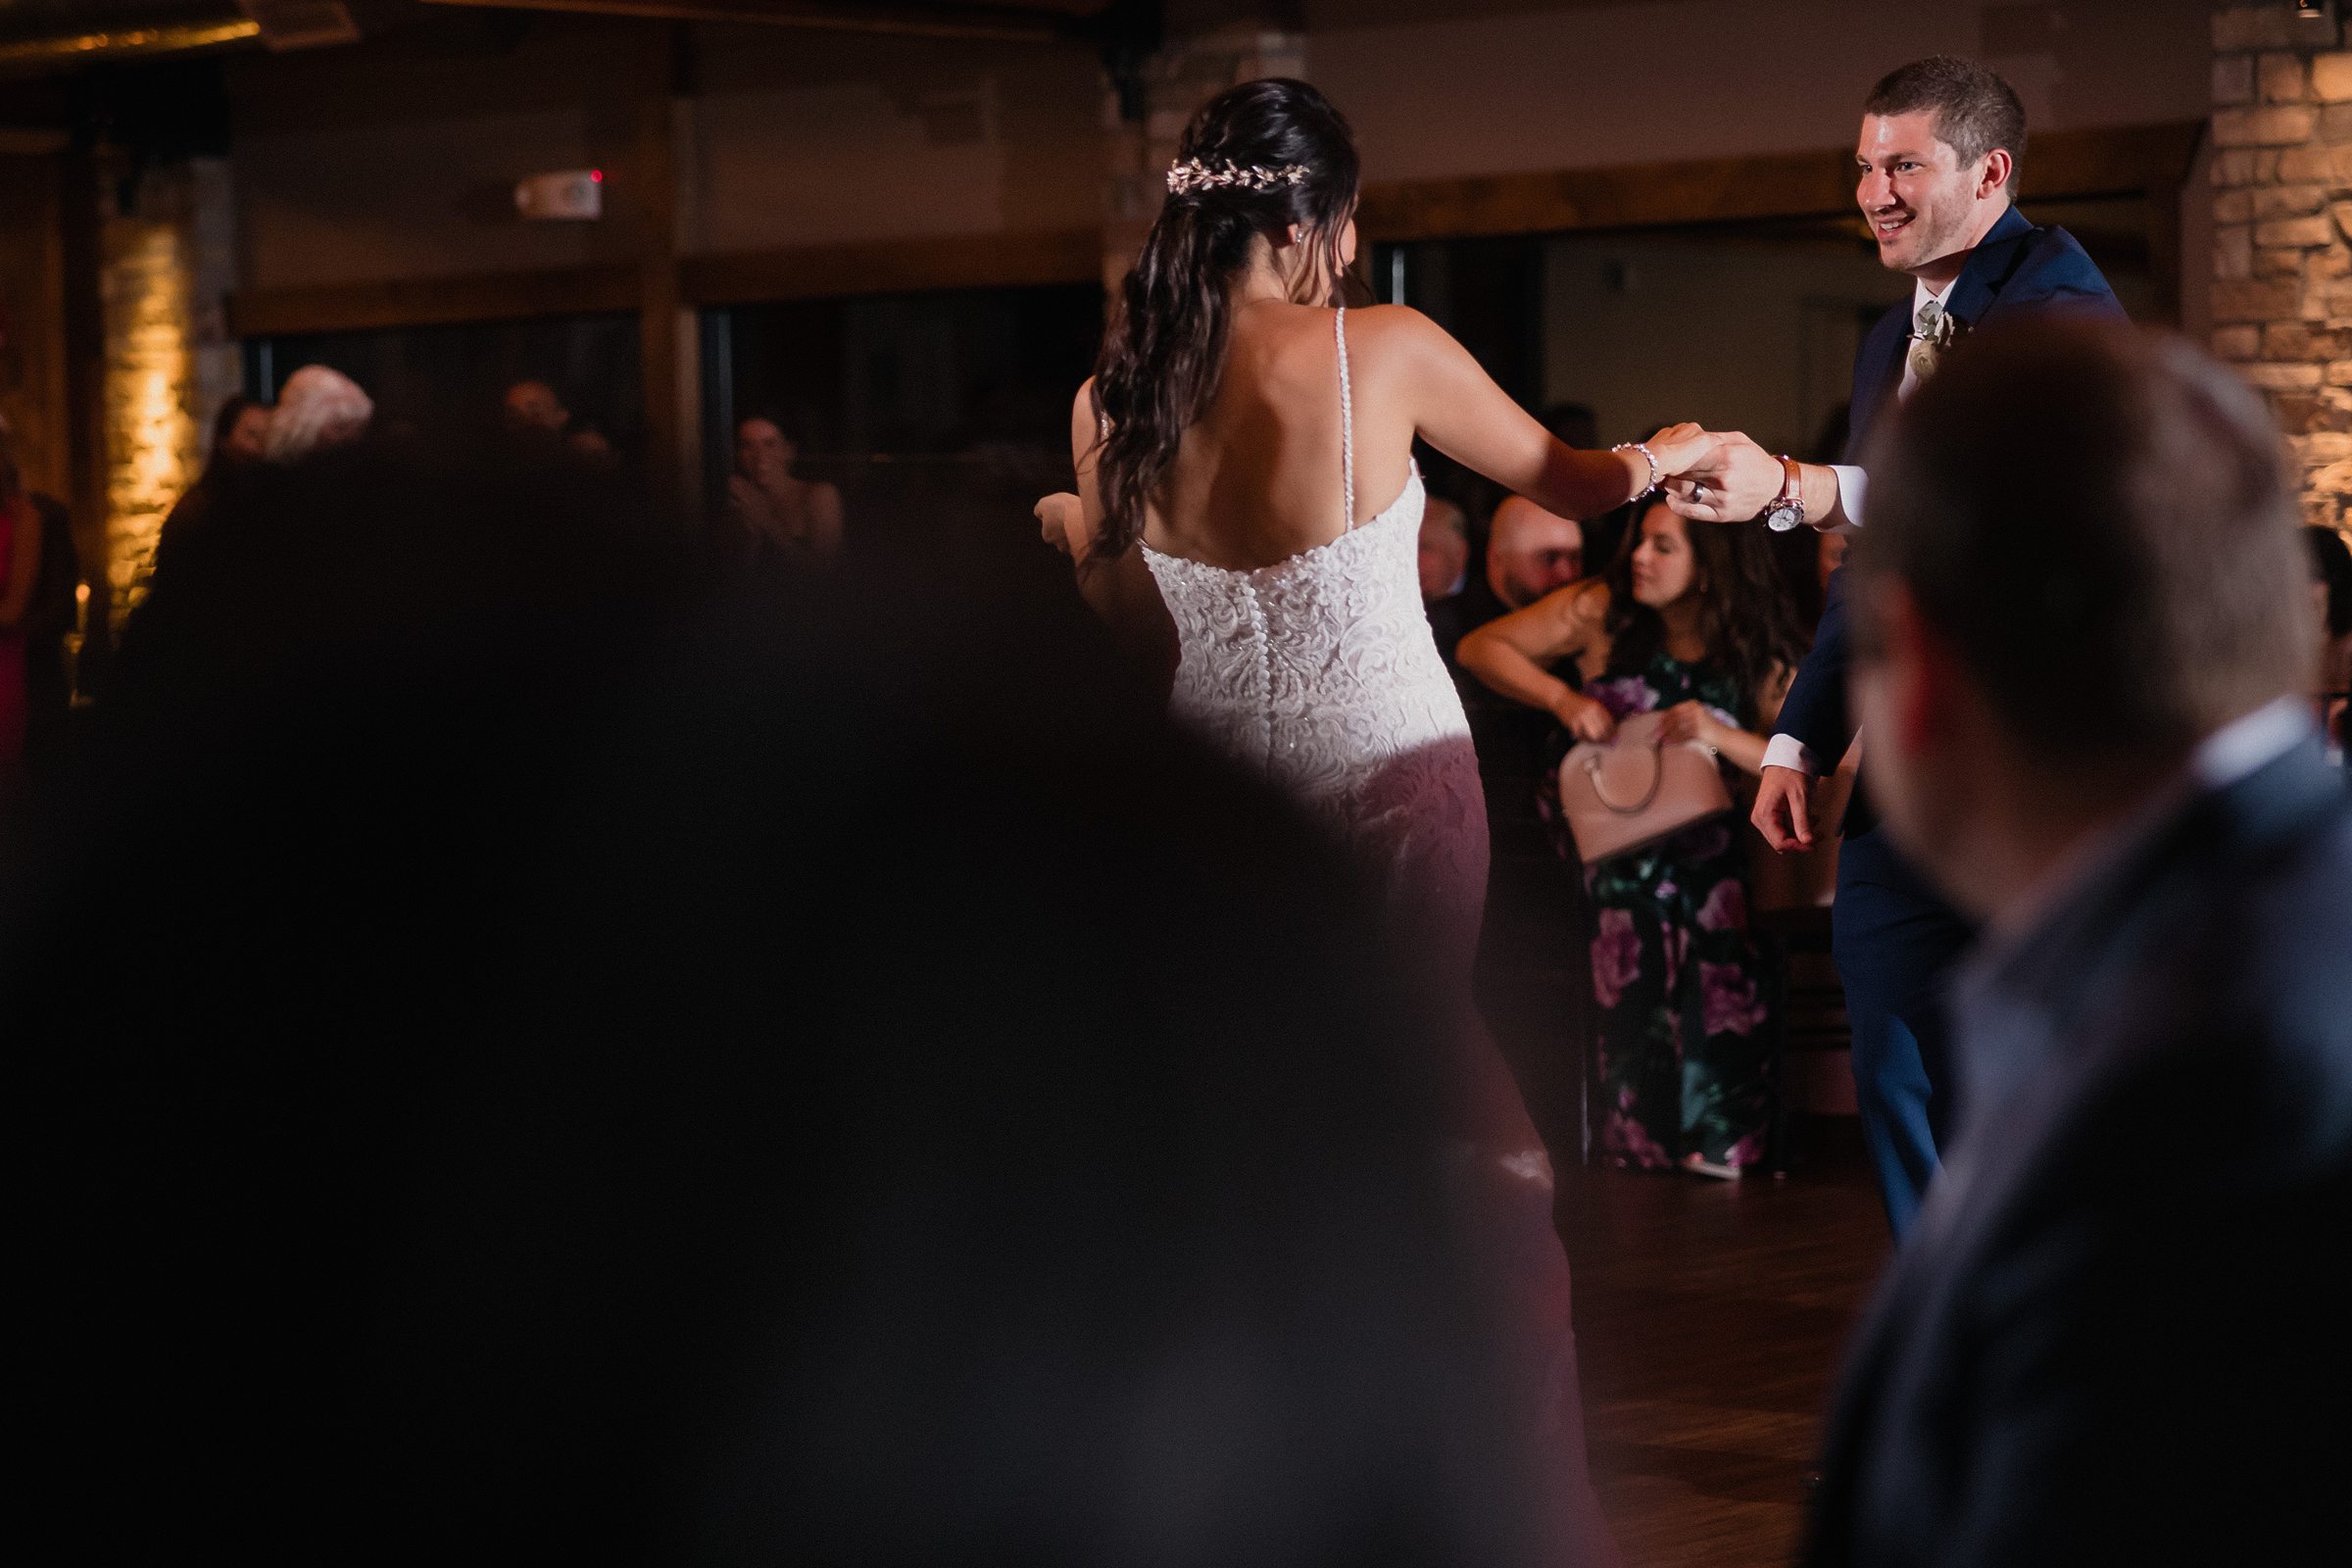 Groom twirls the bride while dancing during their wedding at the Fisherman's Inn in Elburn, Illinois.